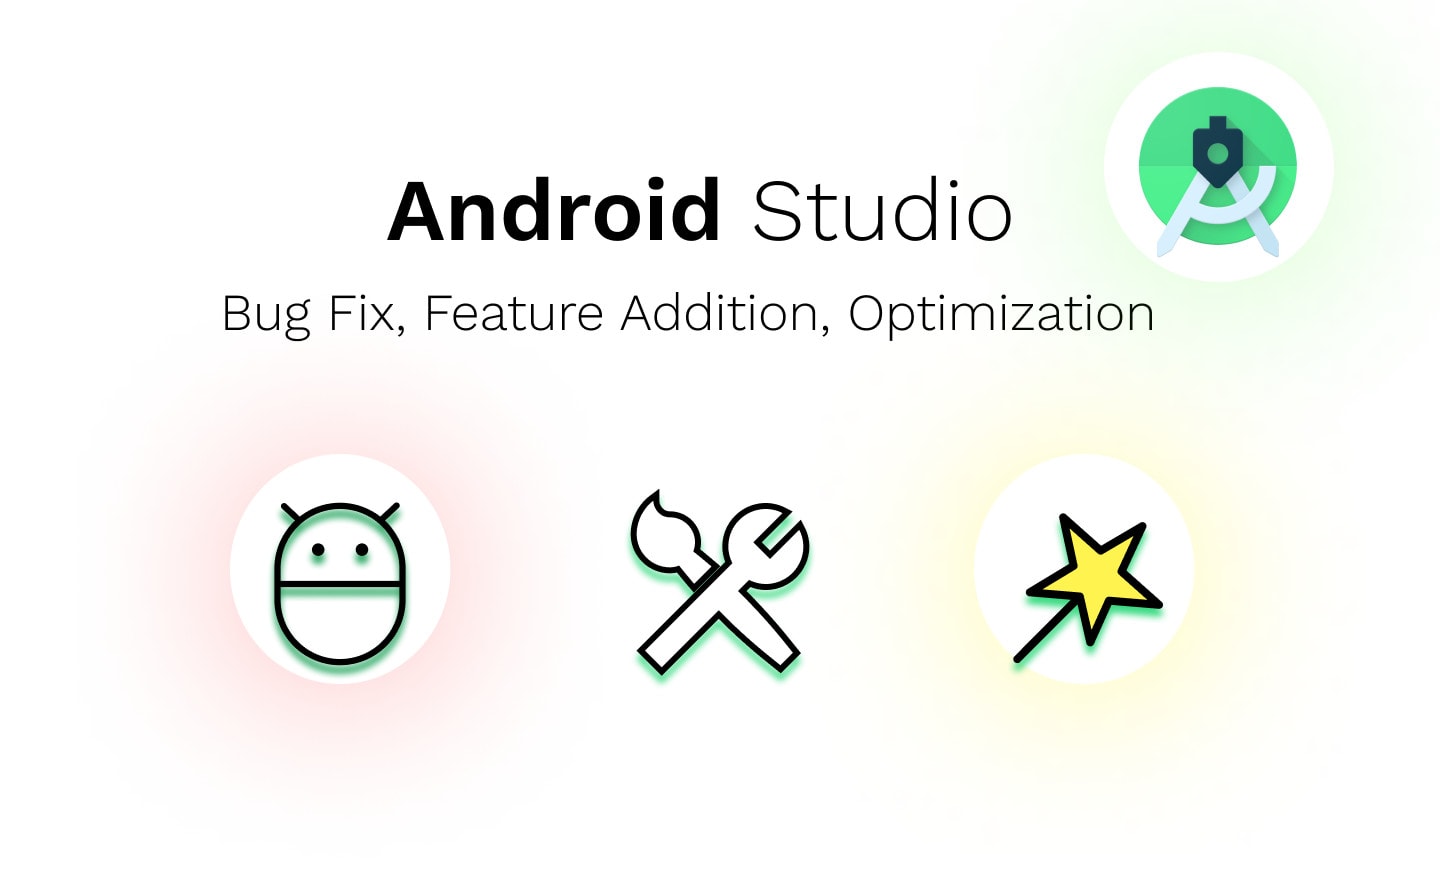 Fix bug in android studio project and add features, optimize by  Nithiskumar563 | Fiverr